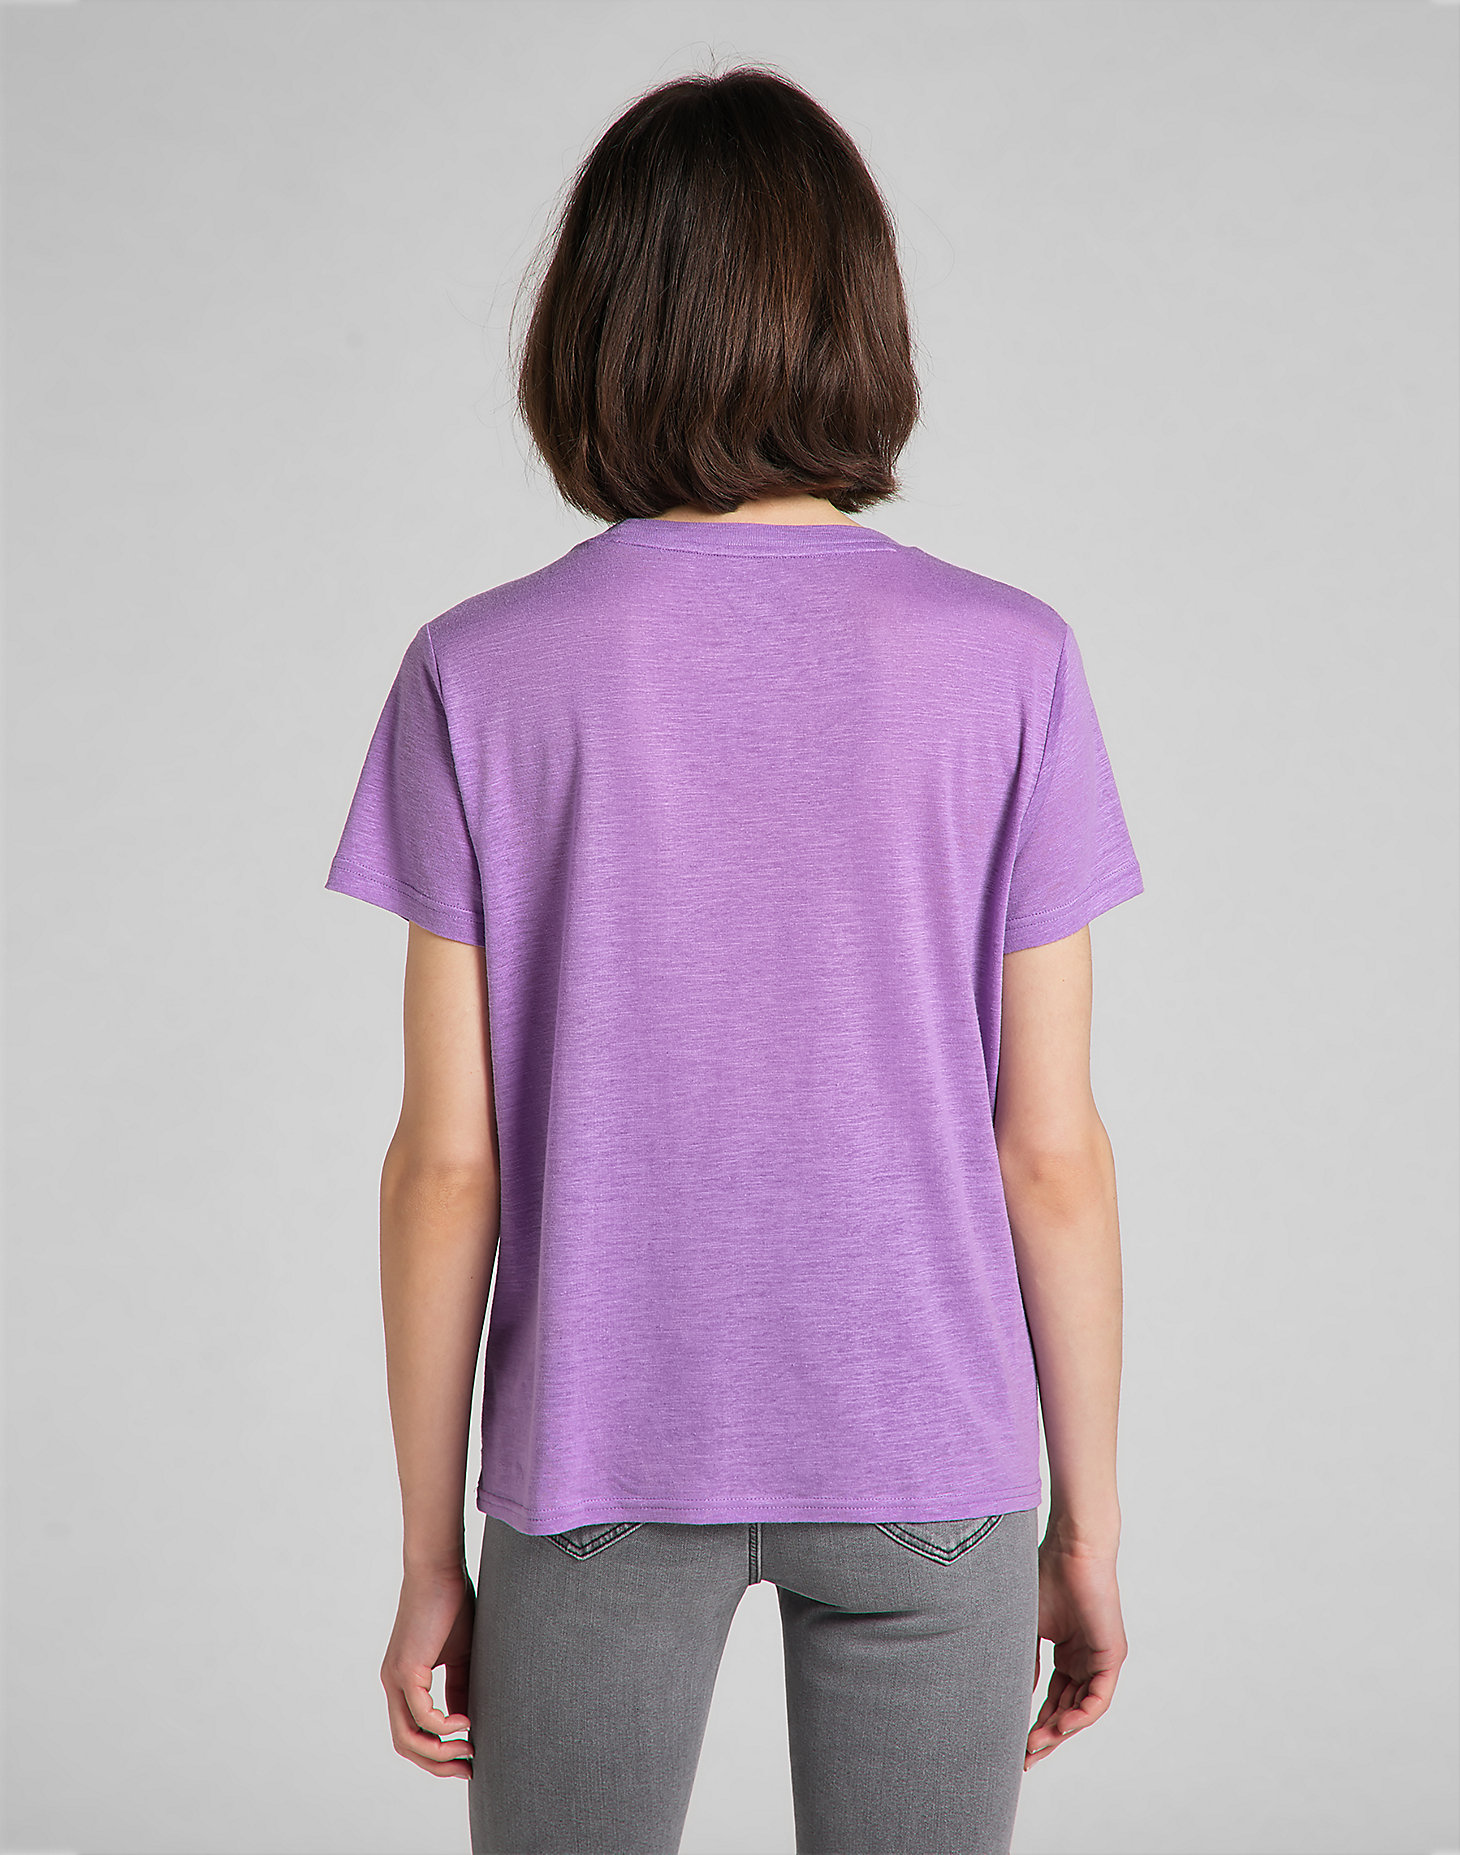 Crew Tee in Amethyst Orchid alternative view 1